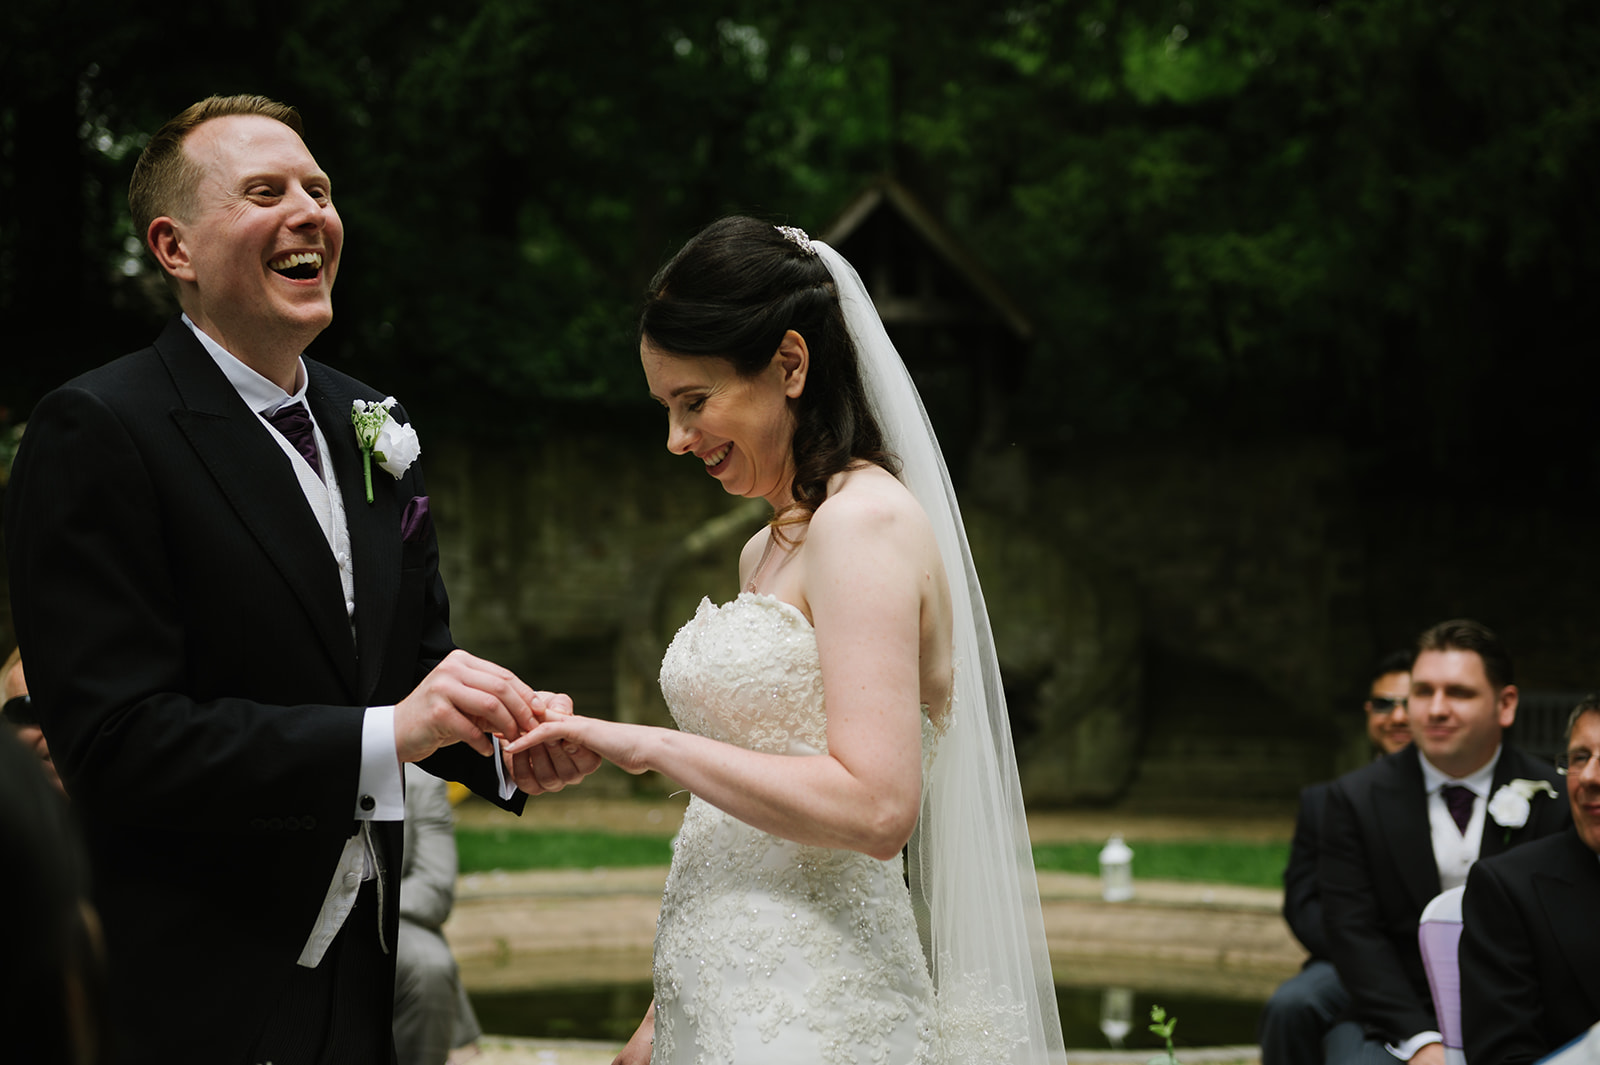 bride and groom laughing as he puts her wedding ring on her finger during the outdoor ceremony